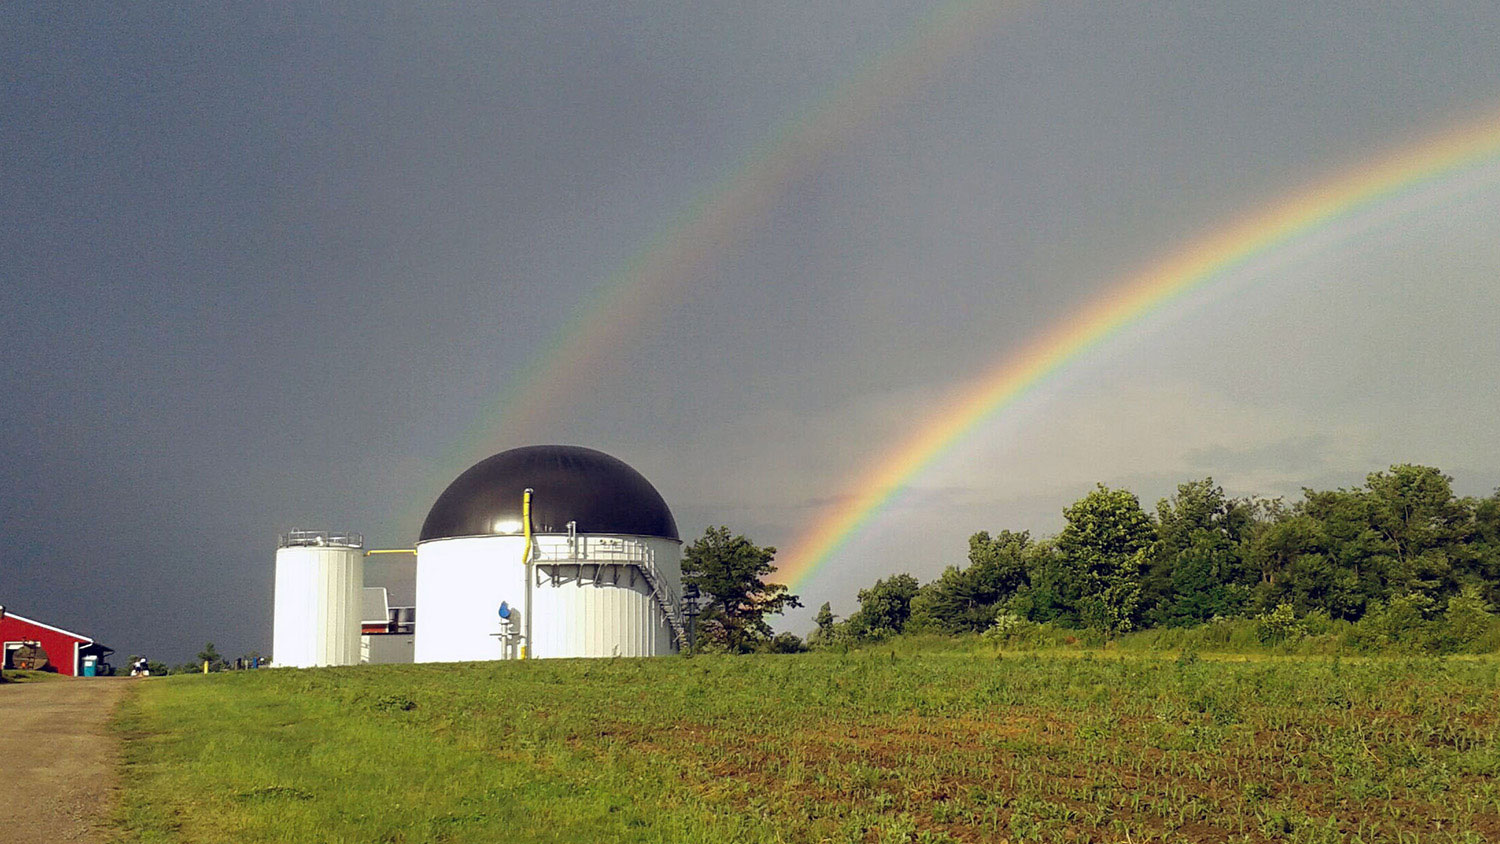 Double rainbow with cloudy skies at a Dairy Farm.